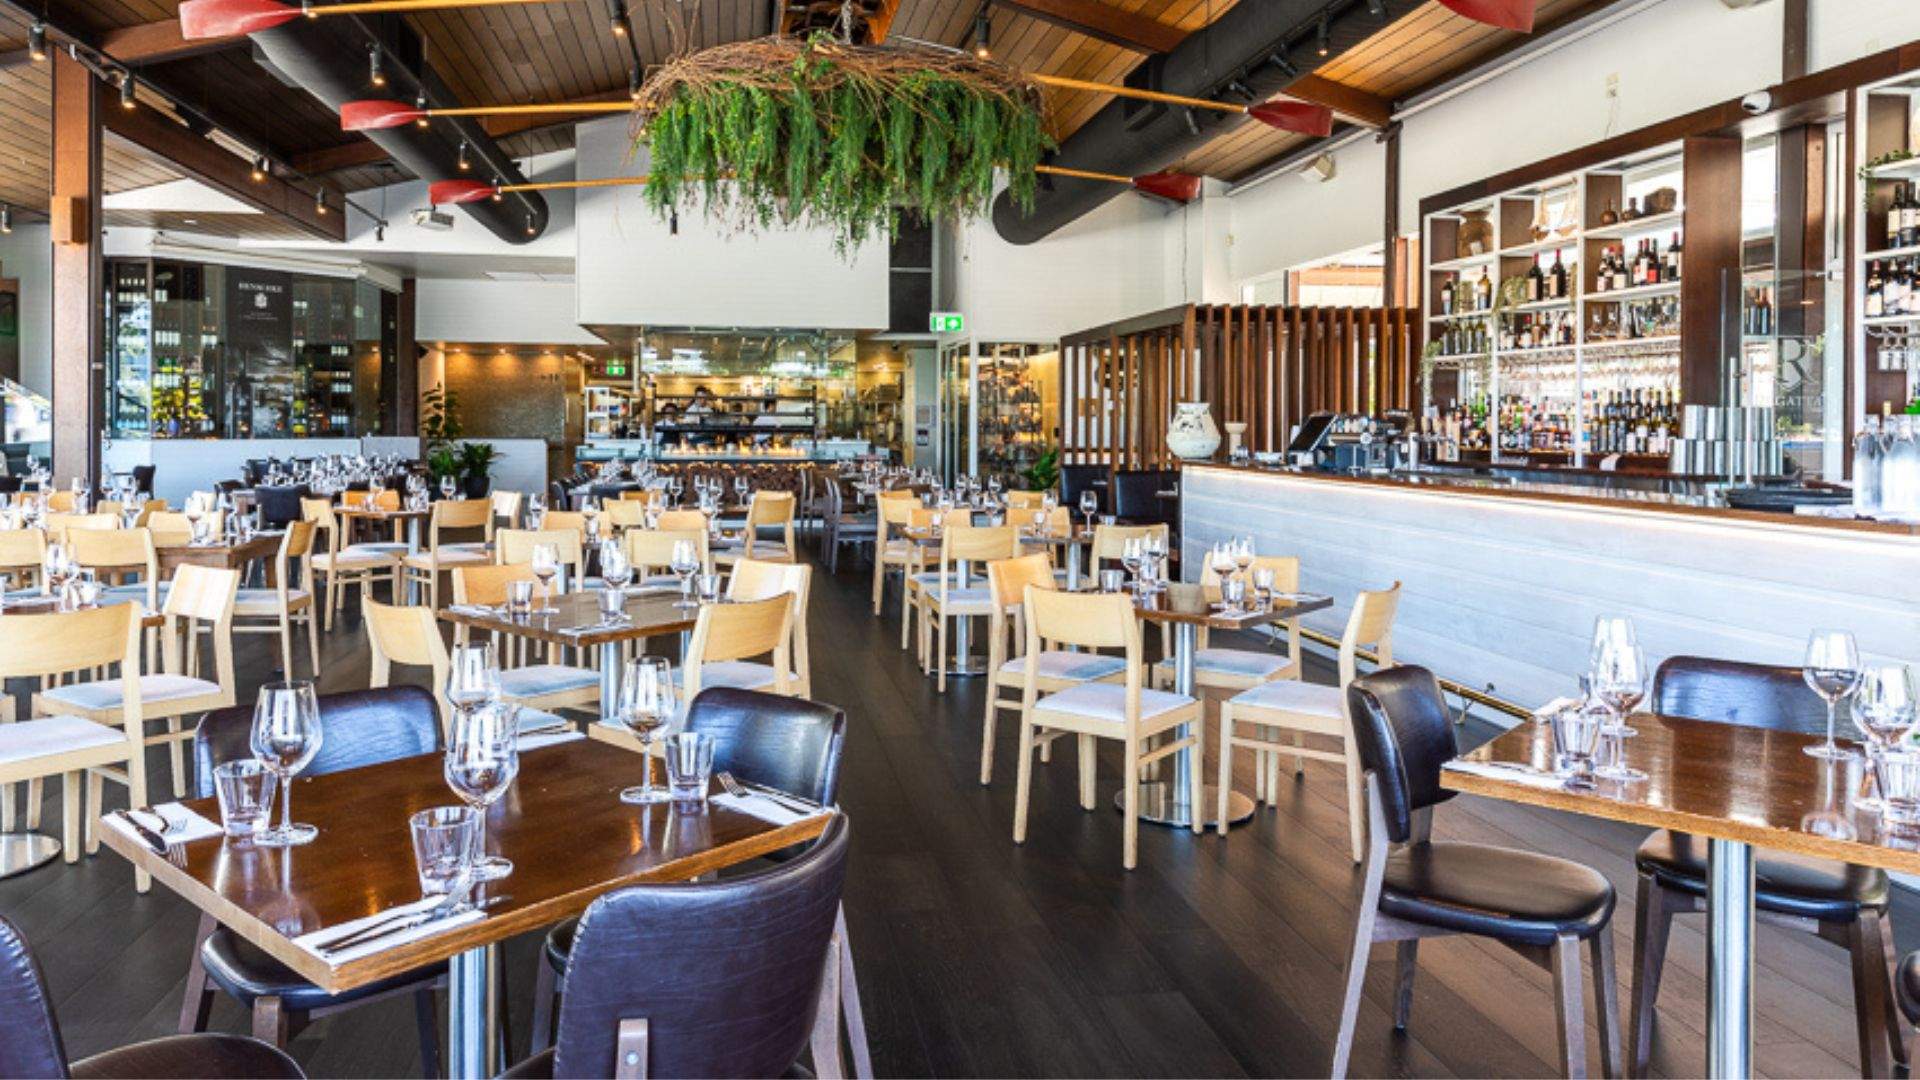 The dining room at The Boathouse in Brisbane